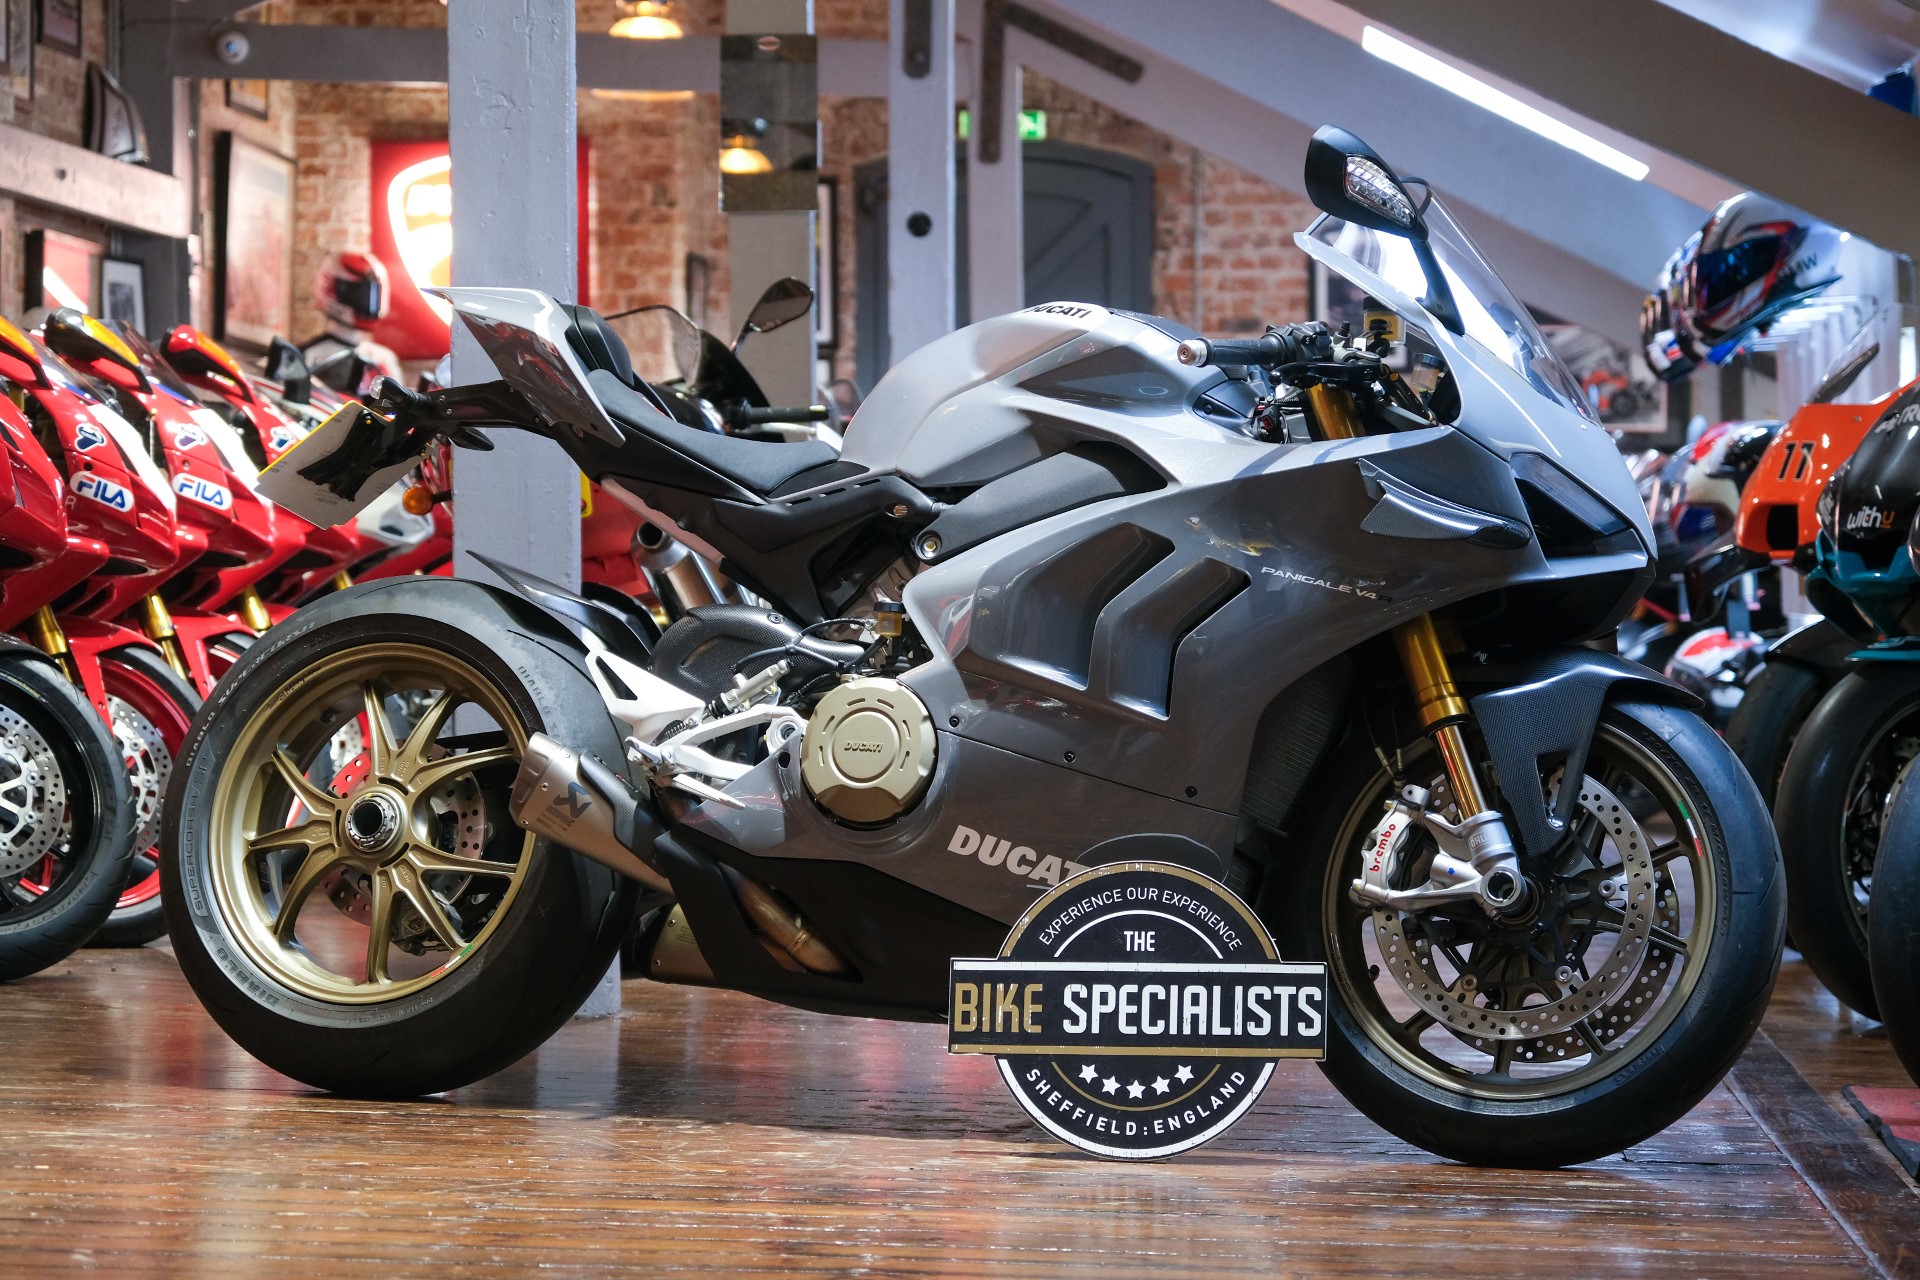 Ducati Panigale V4R, The Bike Specialists